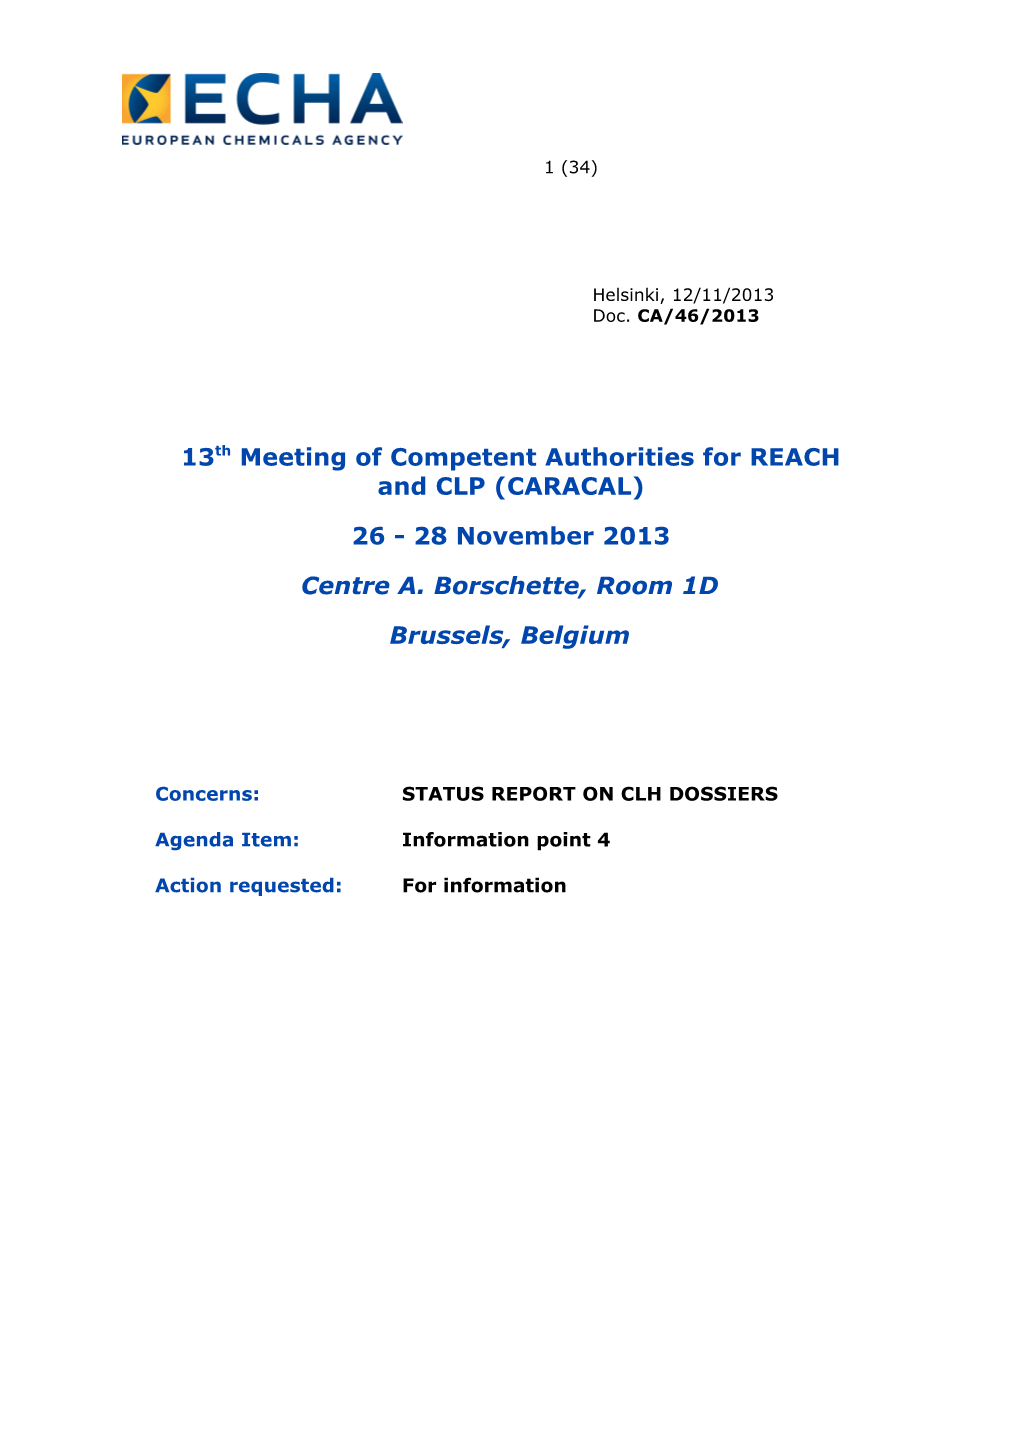 13Th Meeting of Competent Authorities for REACH and CLP (CARACAL)